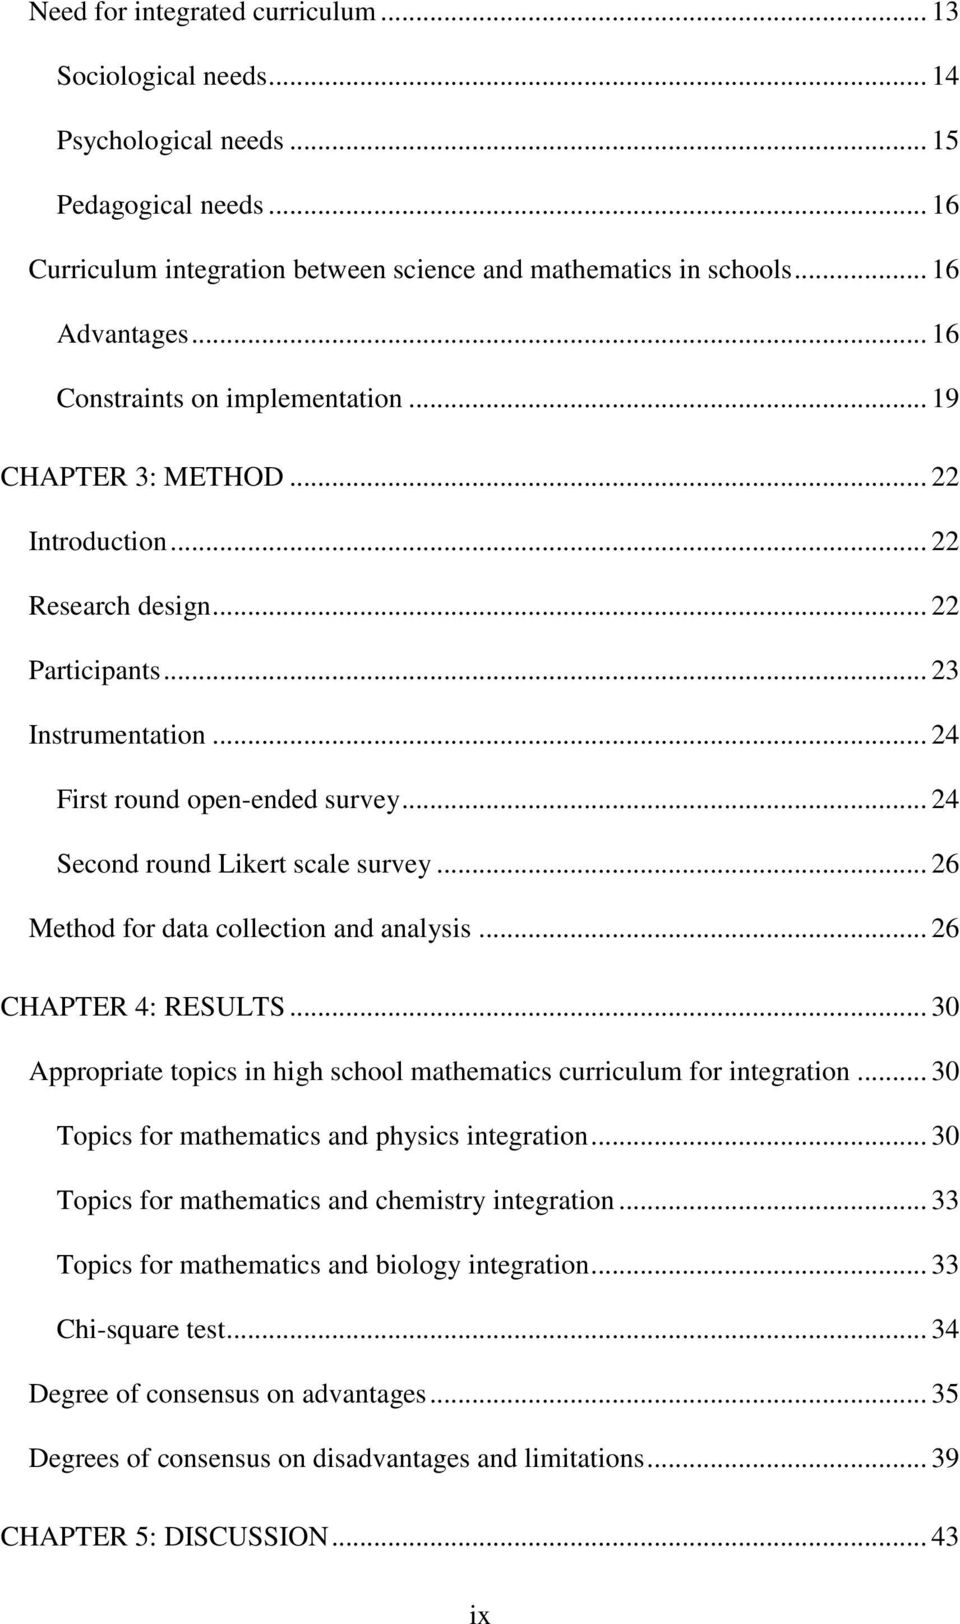 .. 24 Second round Likert scale survey... 26 Method for data collection and analysis... 26 CHAPTER 4: RESULTS... 30 Appropriate topics in high school mathematics curriculum for integration.